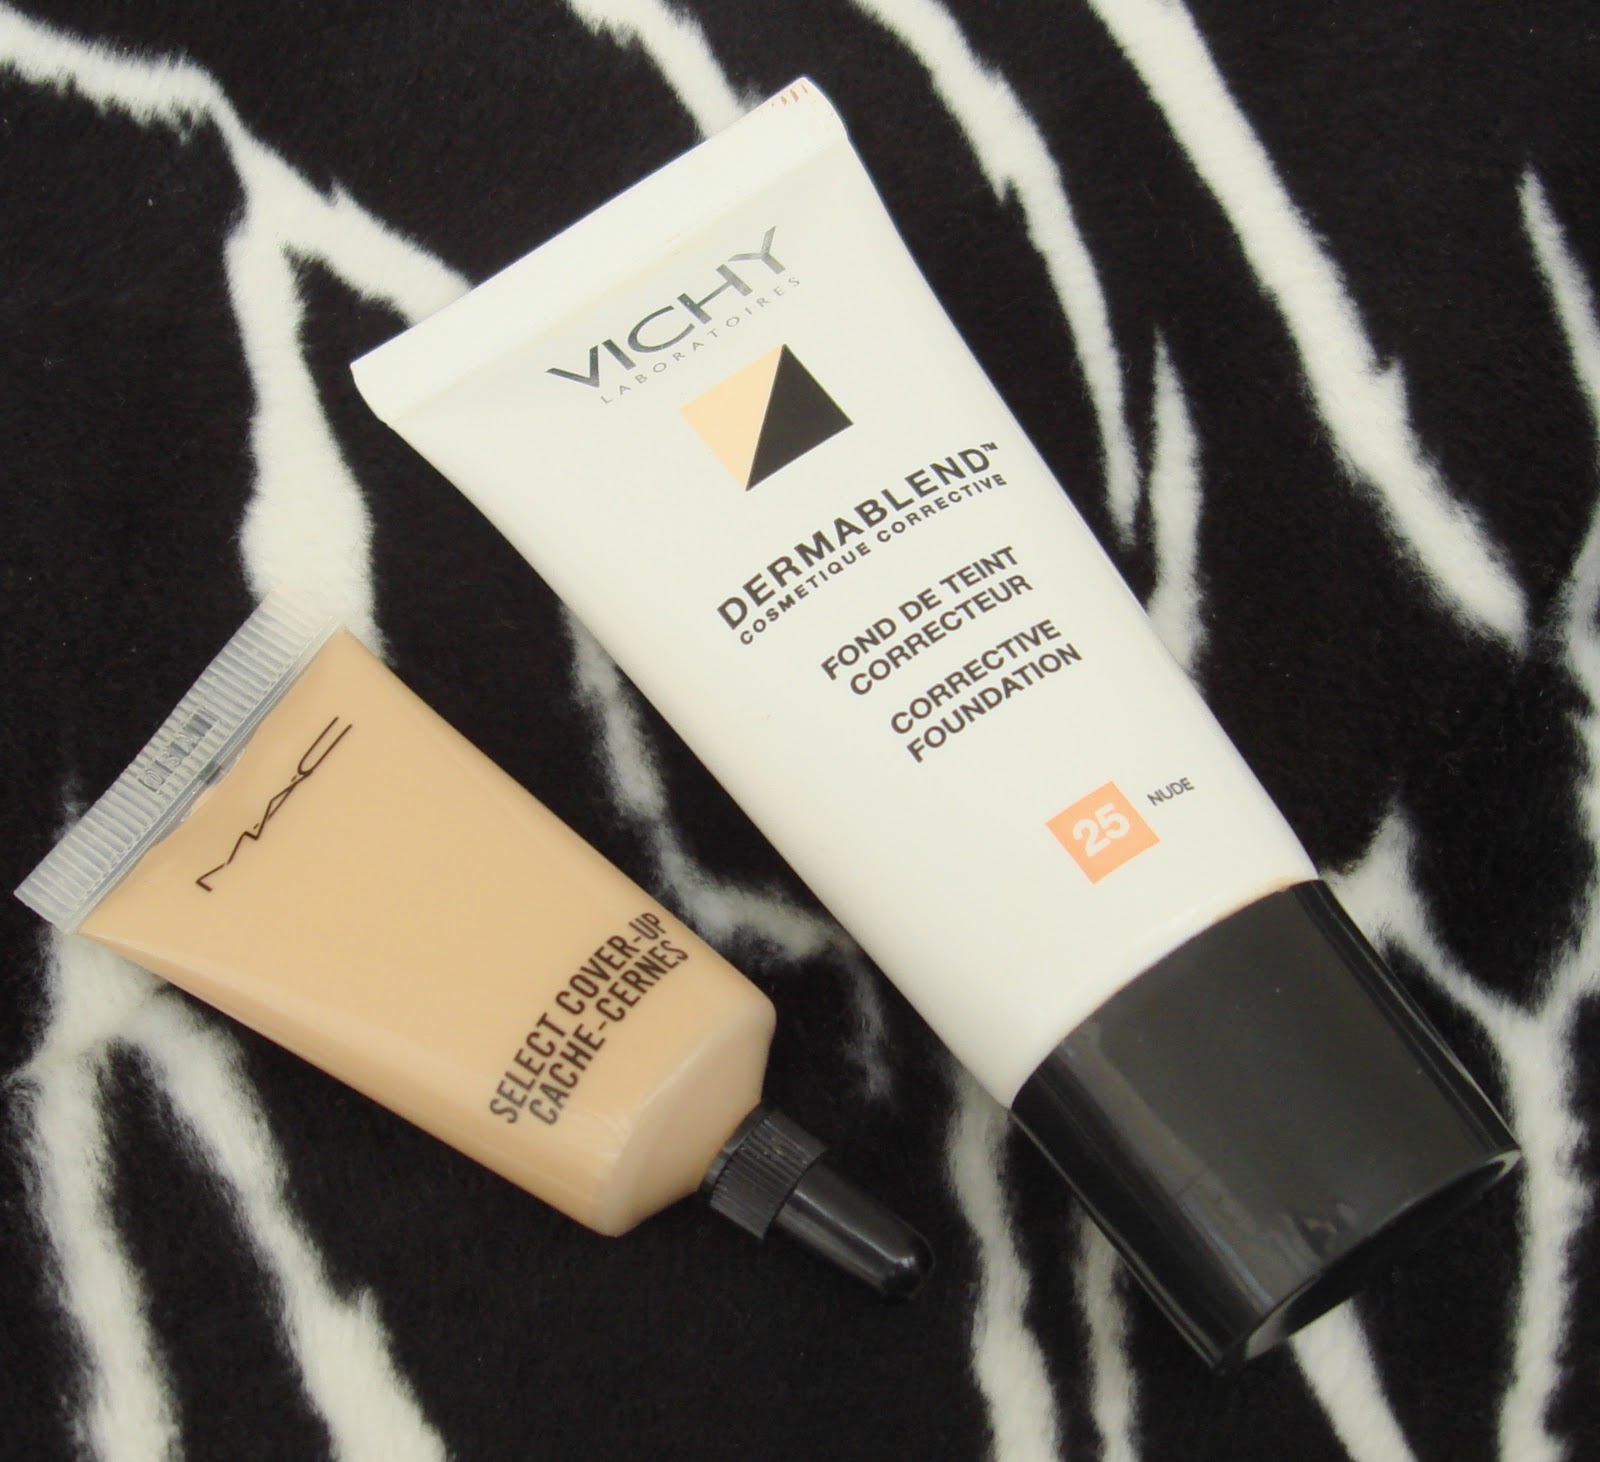 Get Gawjus: Current Concealer routine + Dermablend review